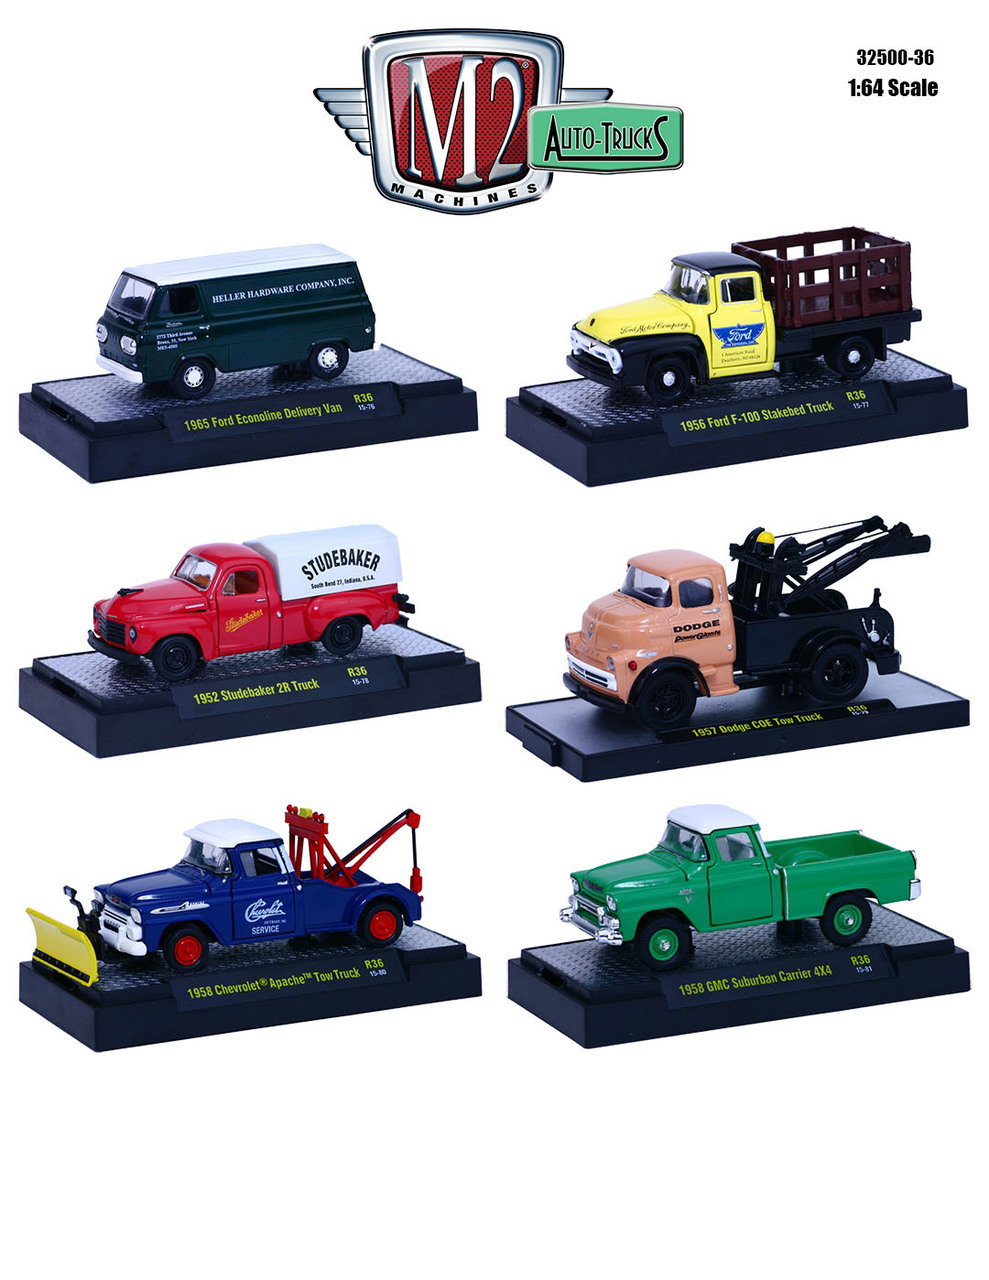 Auto Trucks 6 Piece Set Release 36 IN DISPLAY CASES 1/64 Diecast Model Cars by M2 Machines